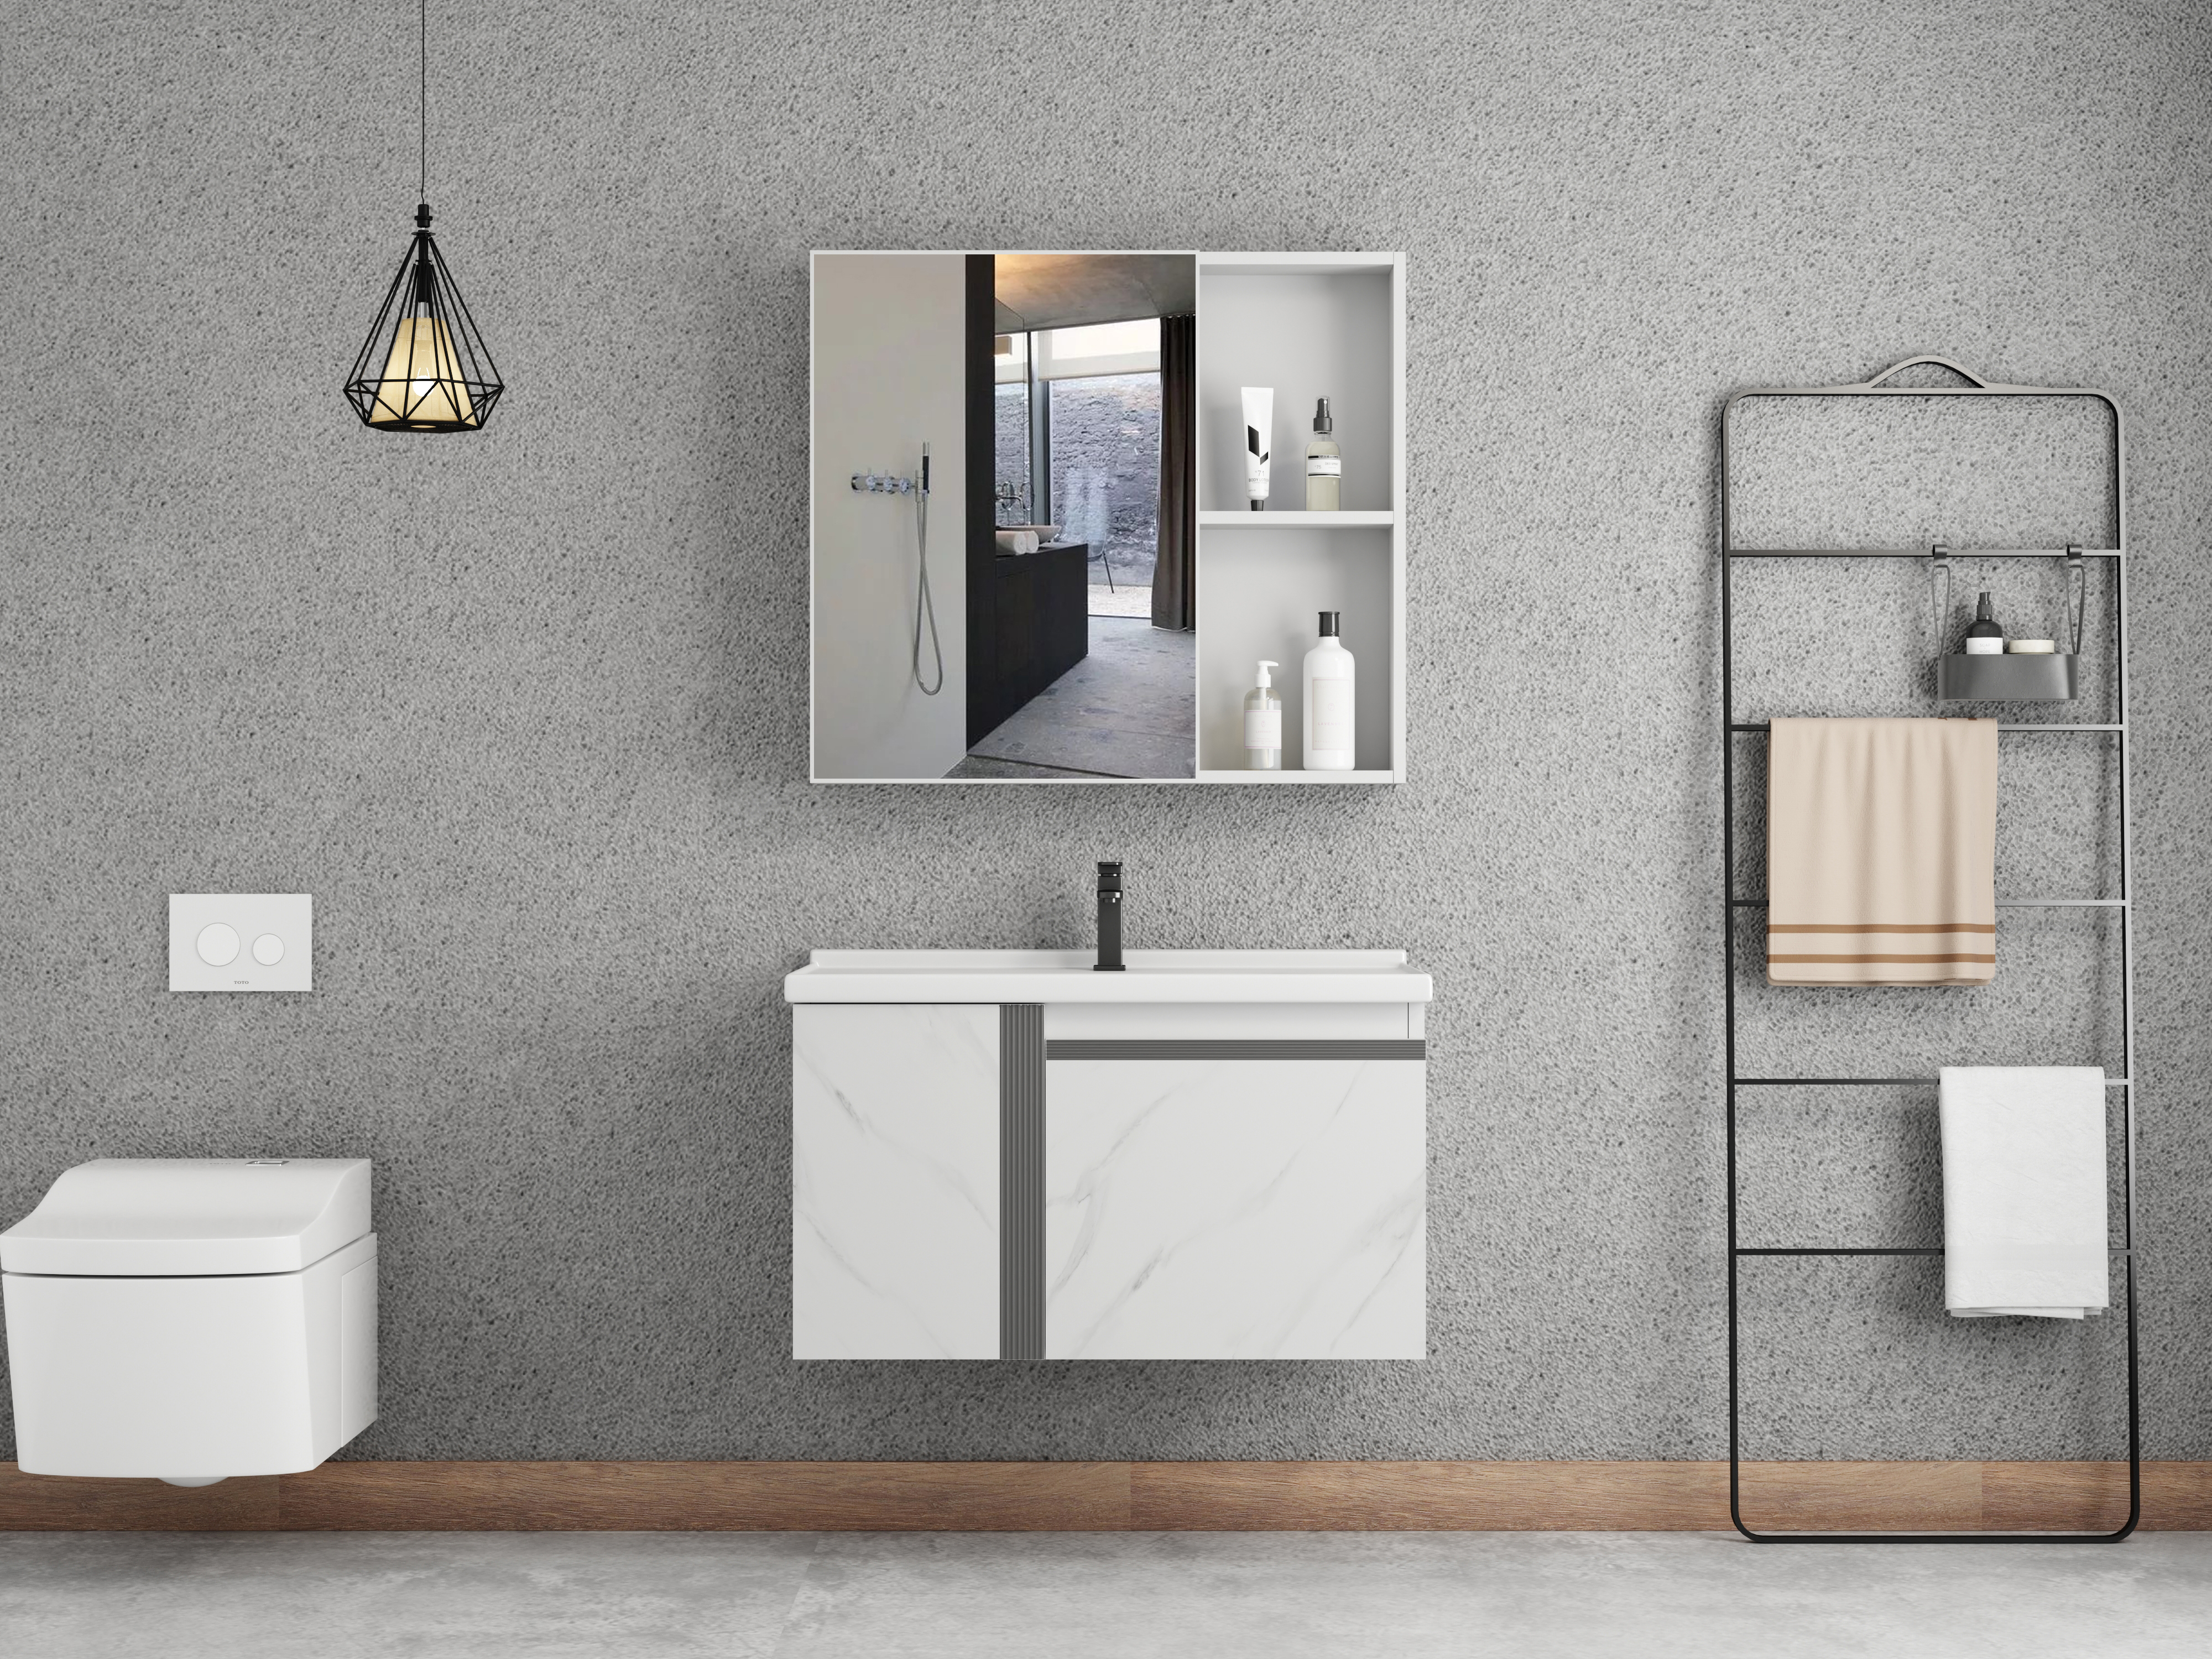 Analysis of the demand for bathroom products